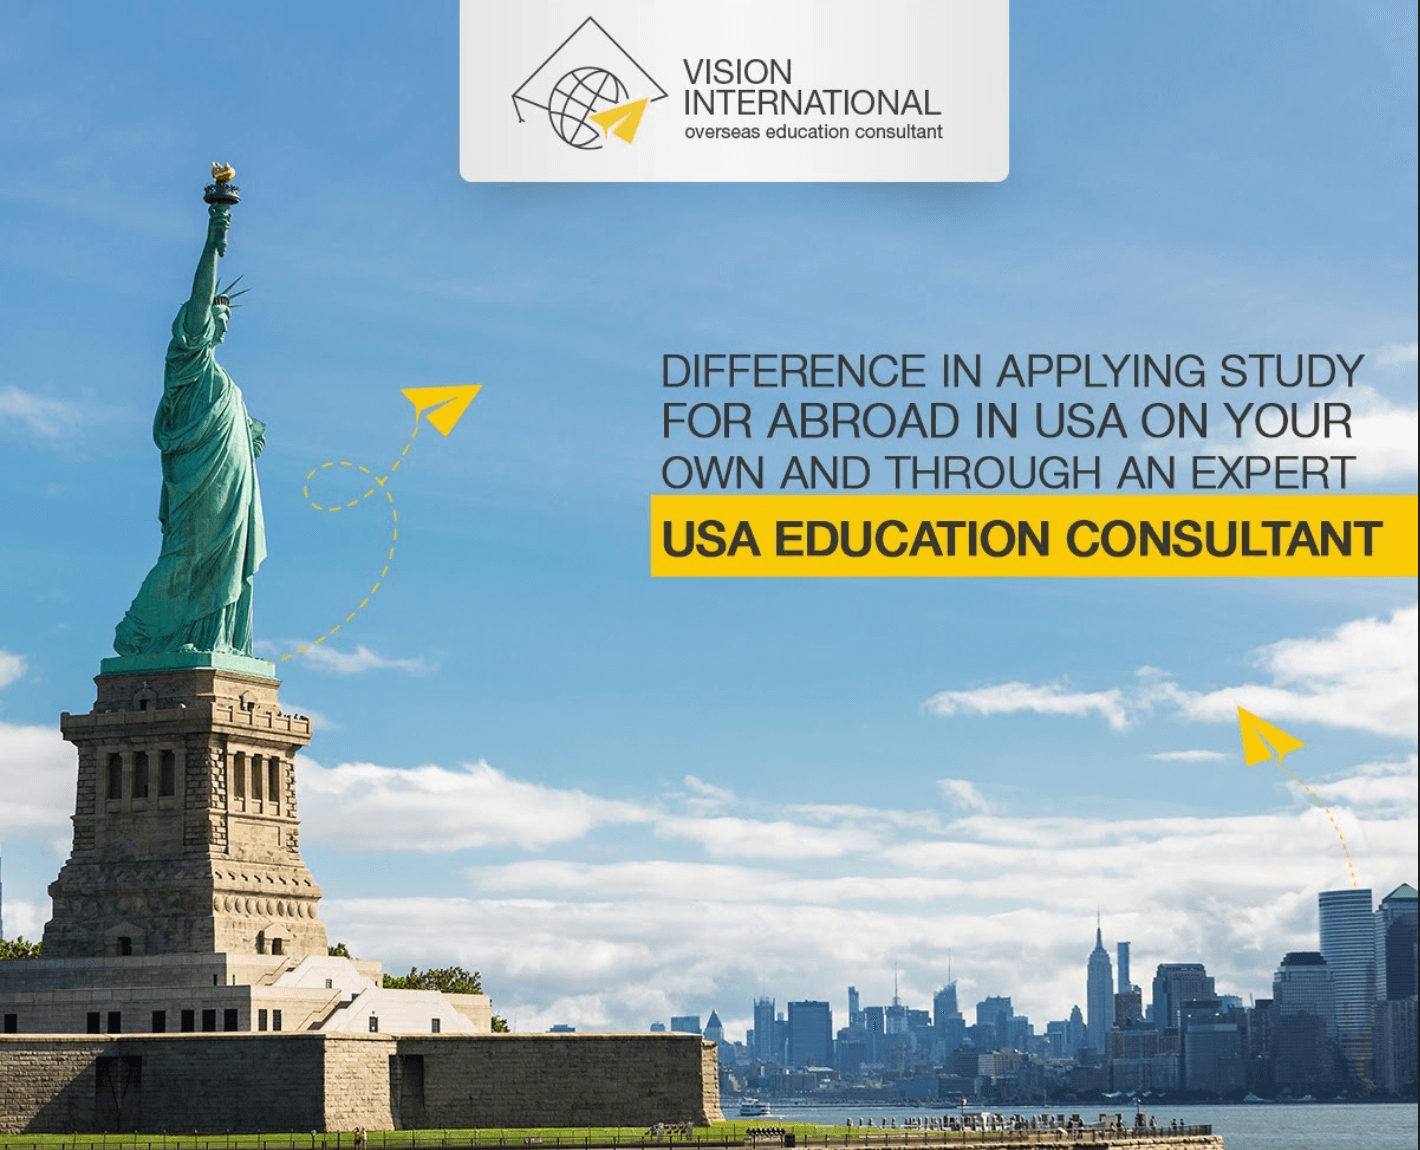 The difference in applying to study abroad in USA on your own and through an Expert USA education consultant